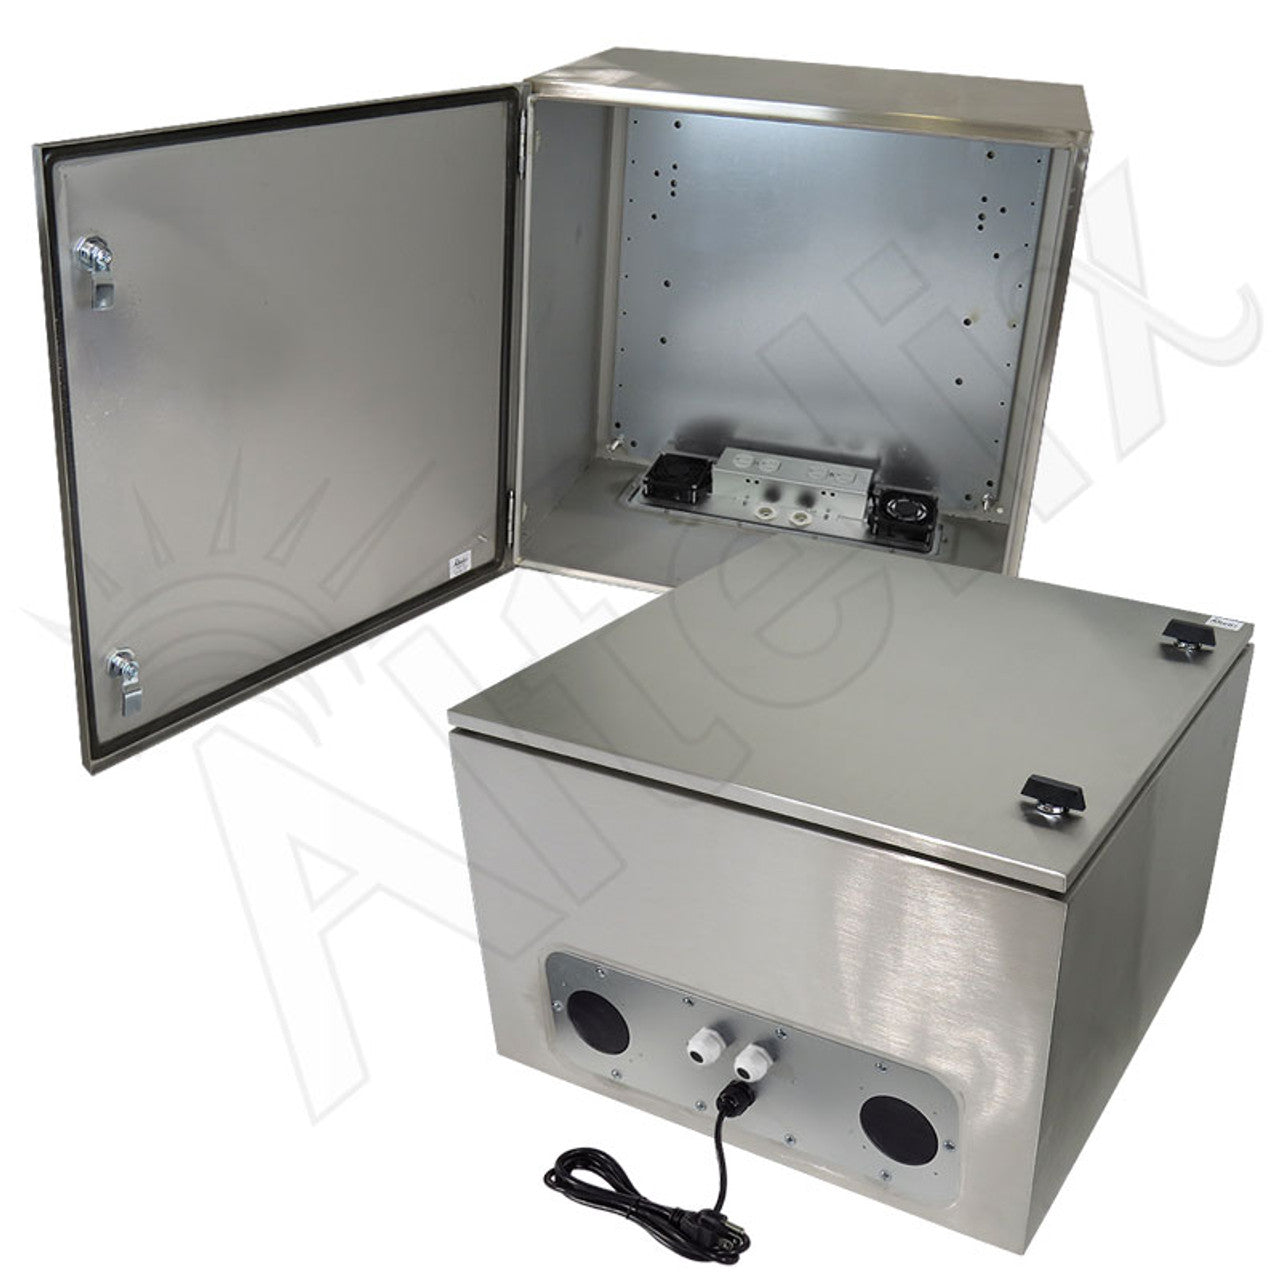 Altelix Stainless Steel Weatherproof NEMA Enclosure with Dual Cooling Fans, 120 VAC Outlets and Power Cord-4